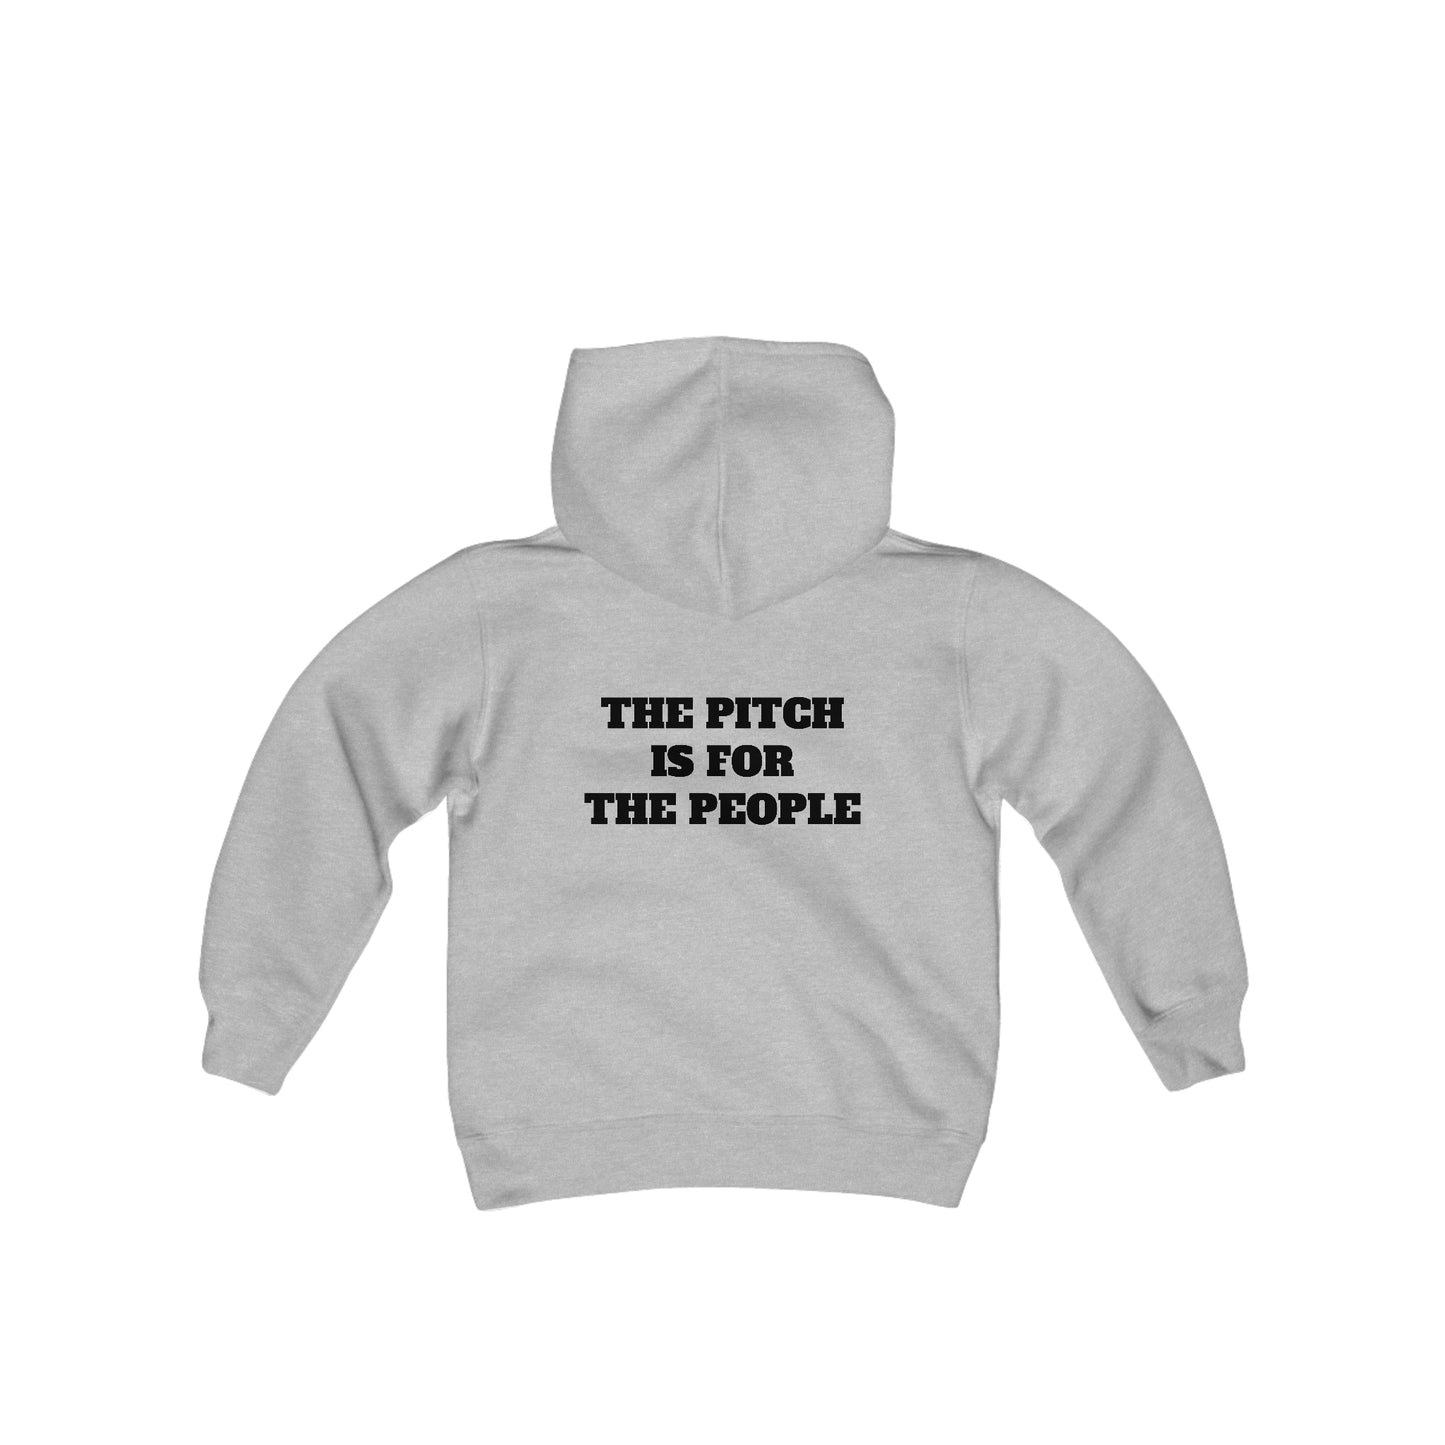 THE PITCH IS FOR THE PEOPLE Youth Hoodie (Unisex)